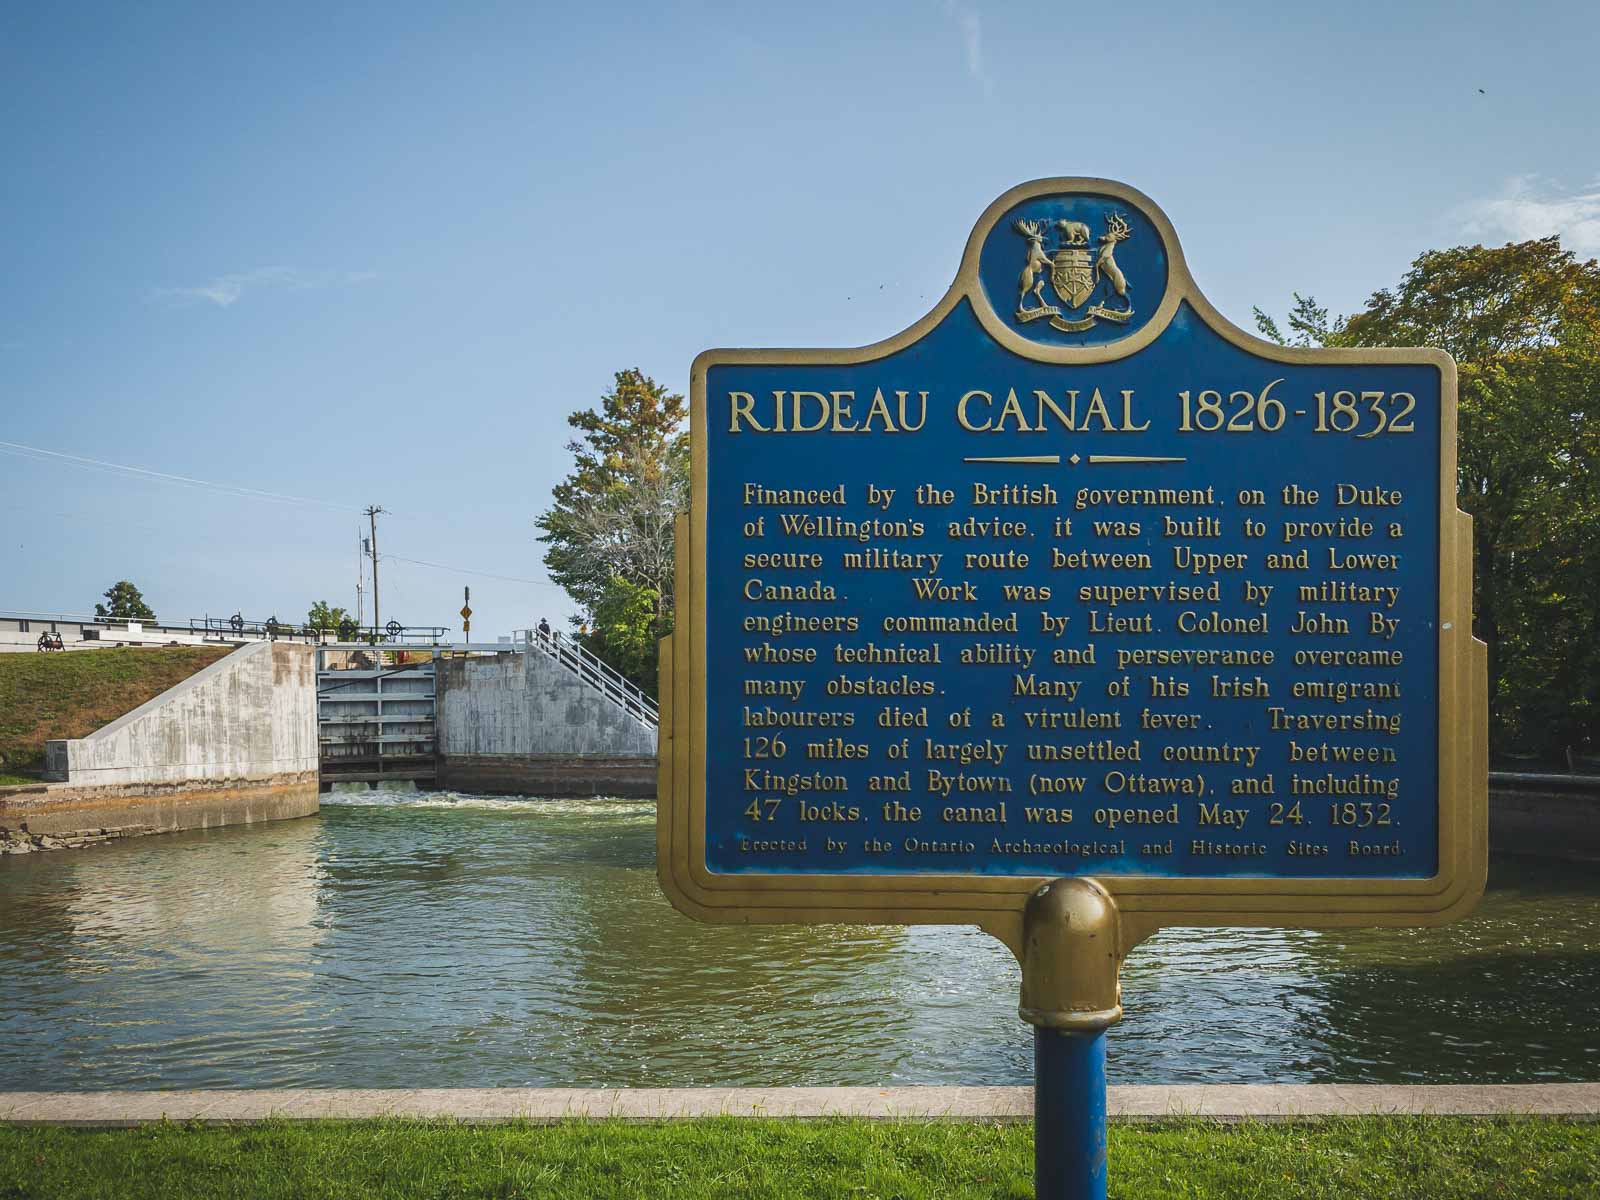 History of the Rideau Canal